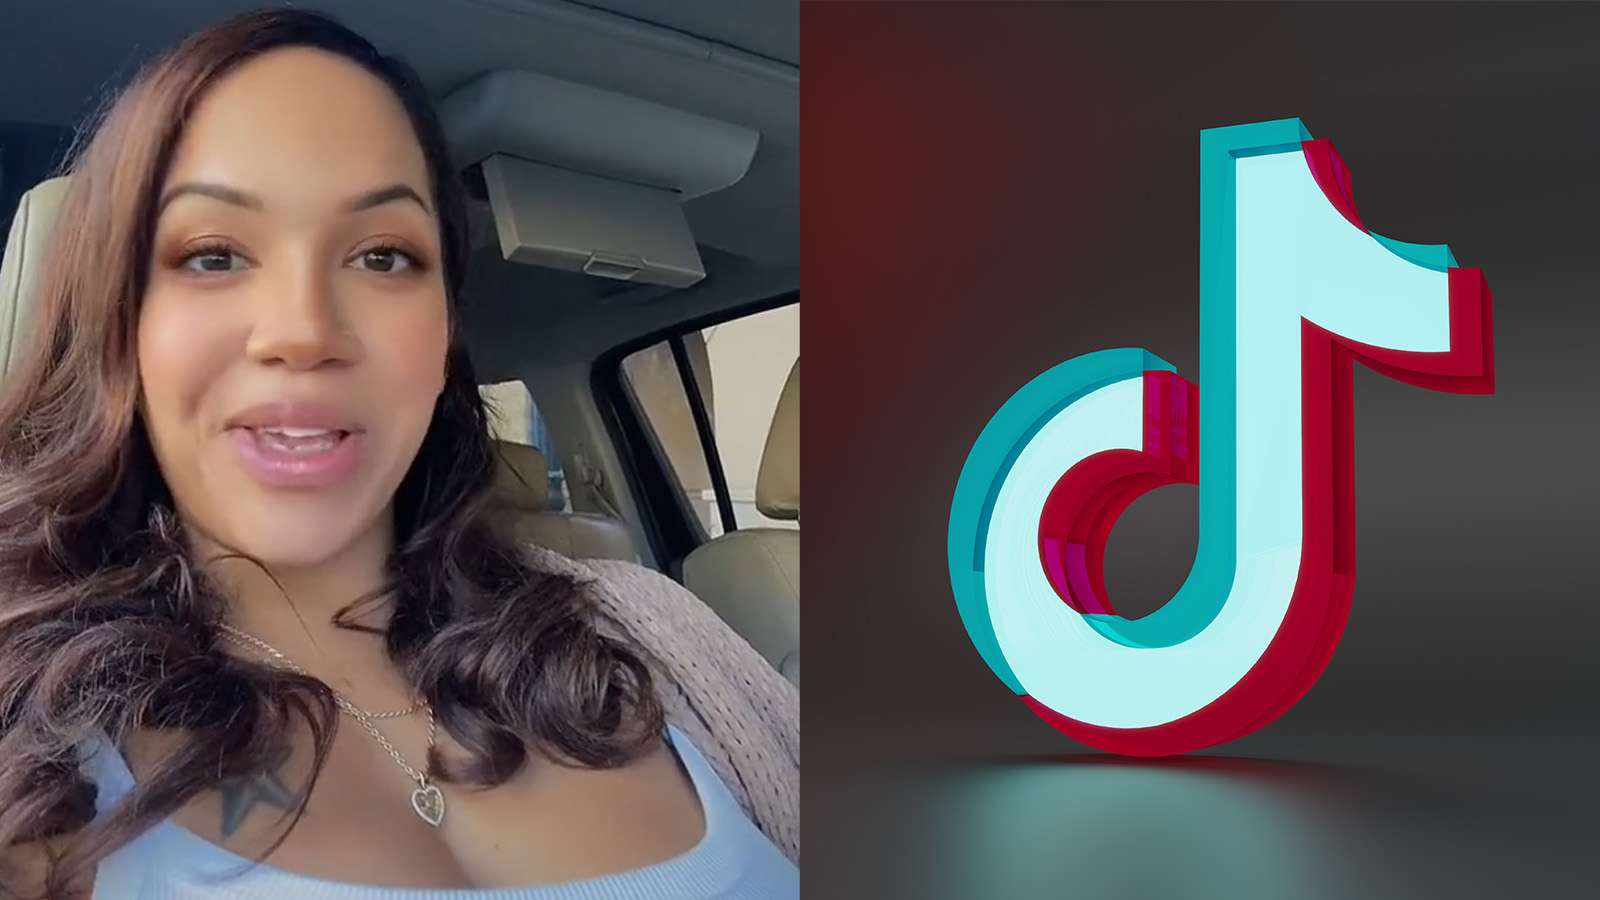 Woman's viral TikTok video details nipple falling off while